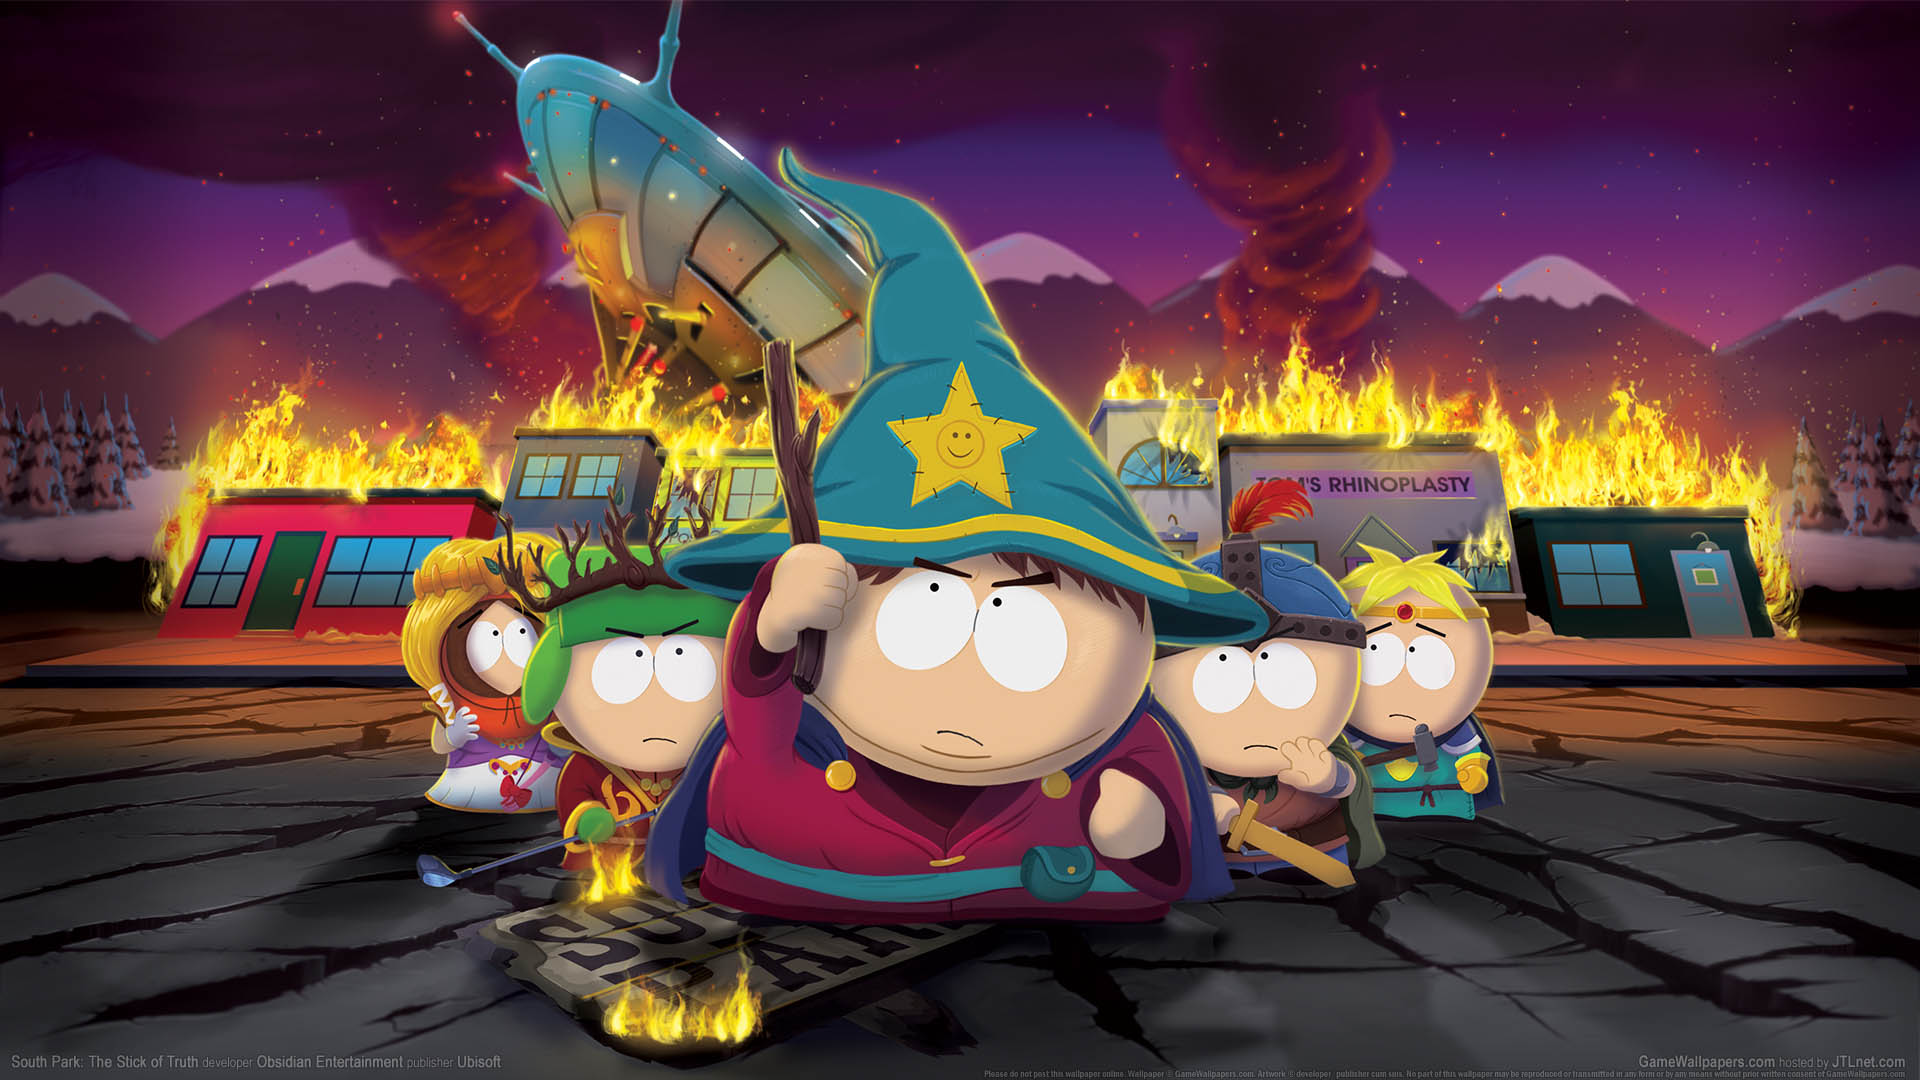 South Park: The Stick of Truth wallpaper 01 1920x1080